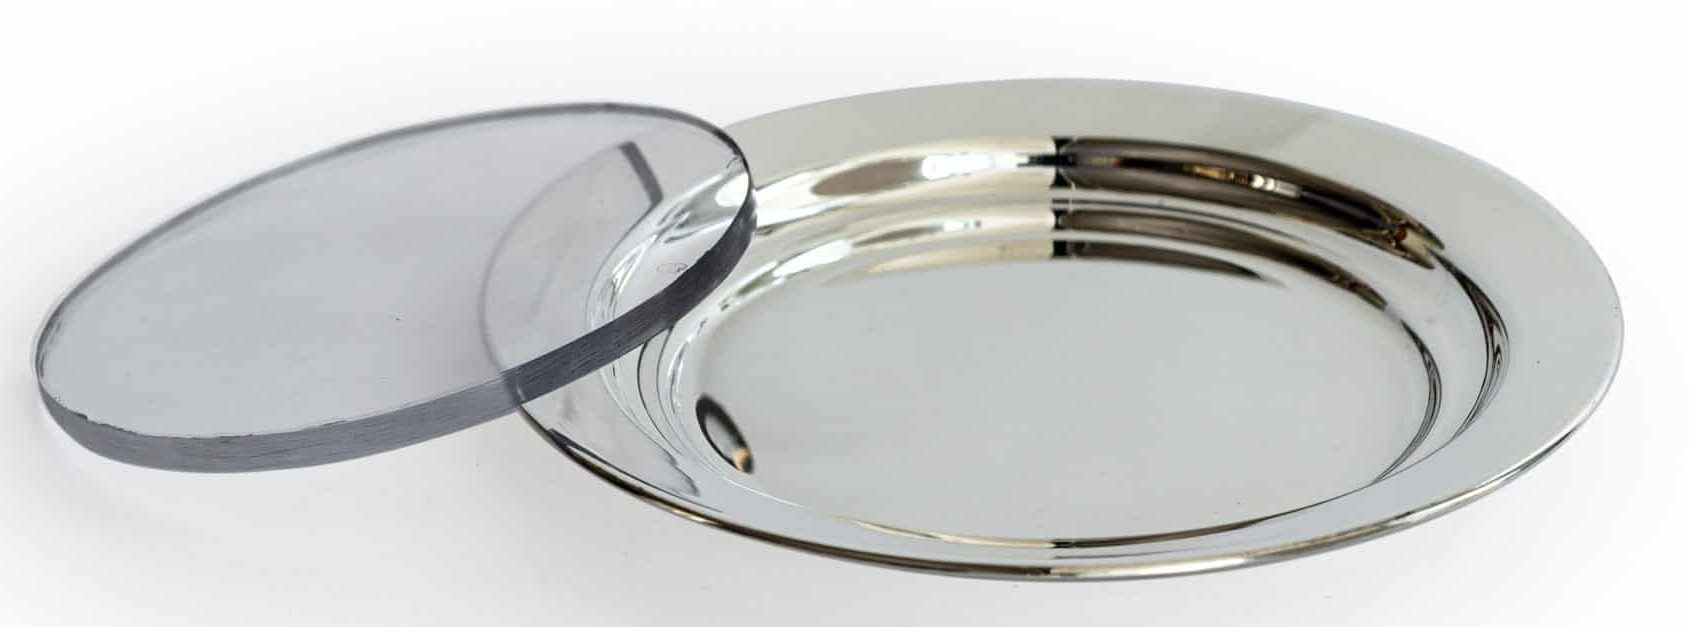 Classic 925 Sterling Silver Plate for Kiddush Cup